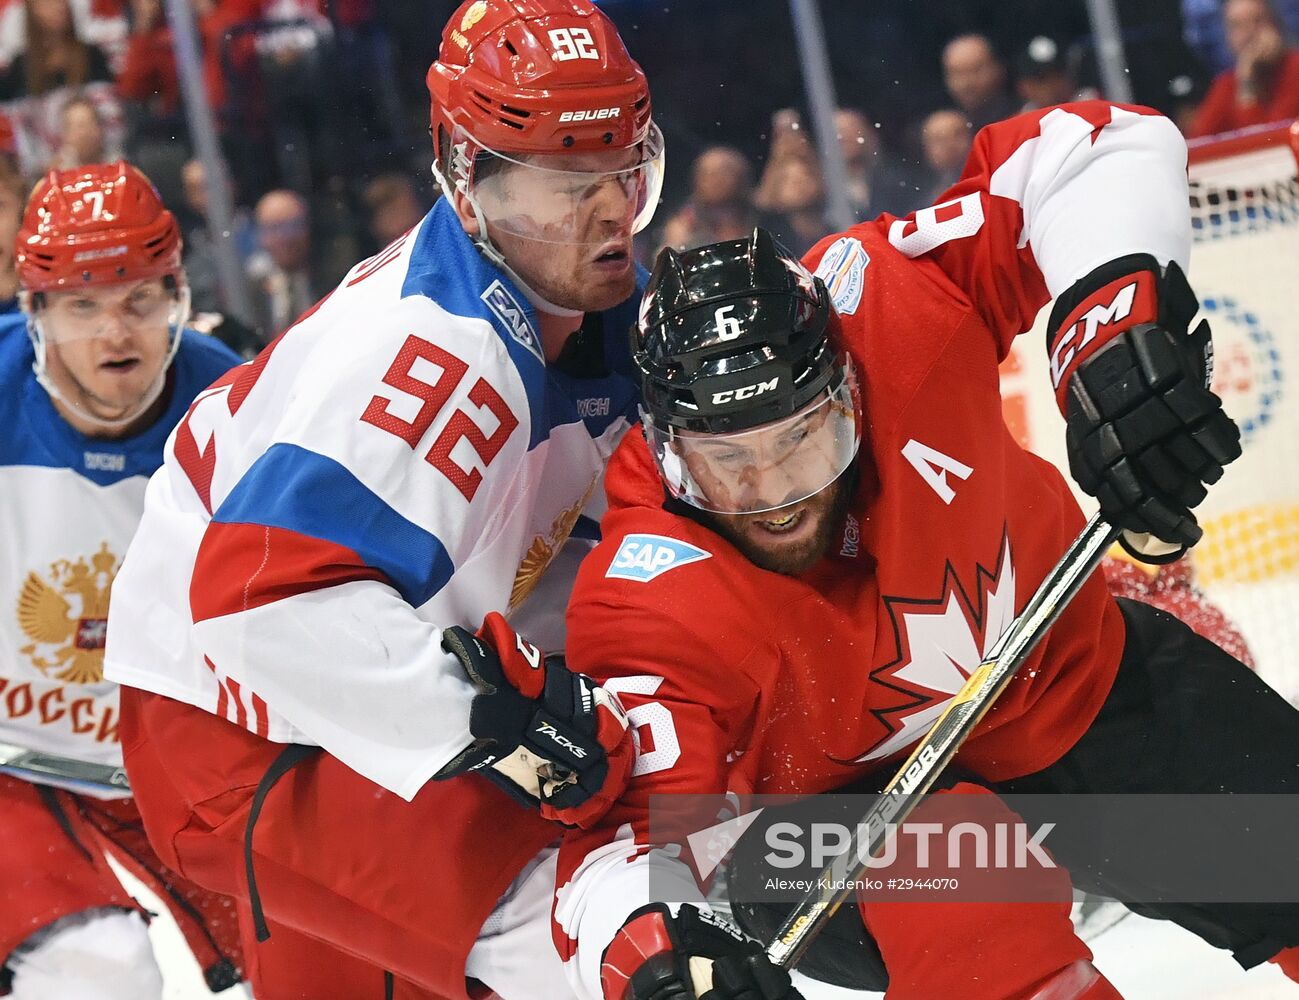 Russia Vs Canada, Semifinal, 2016 World Cup of Hockey